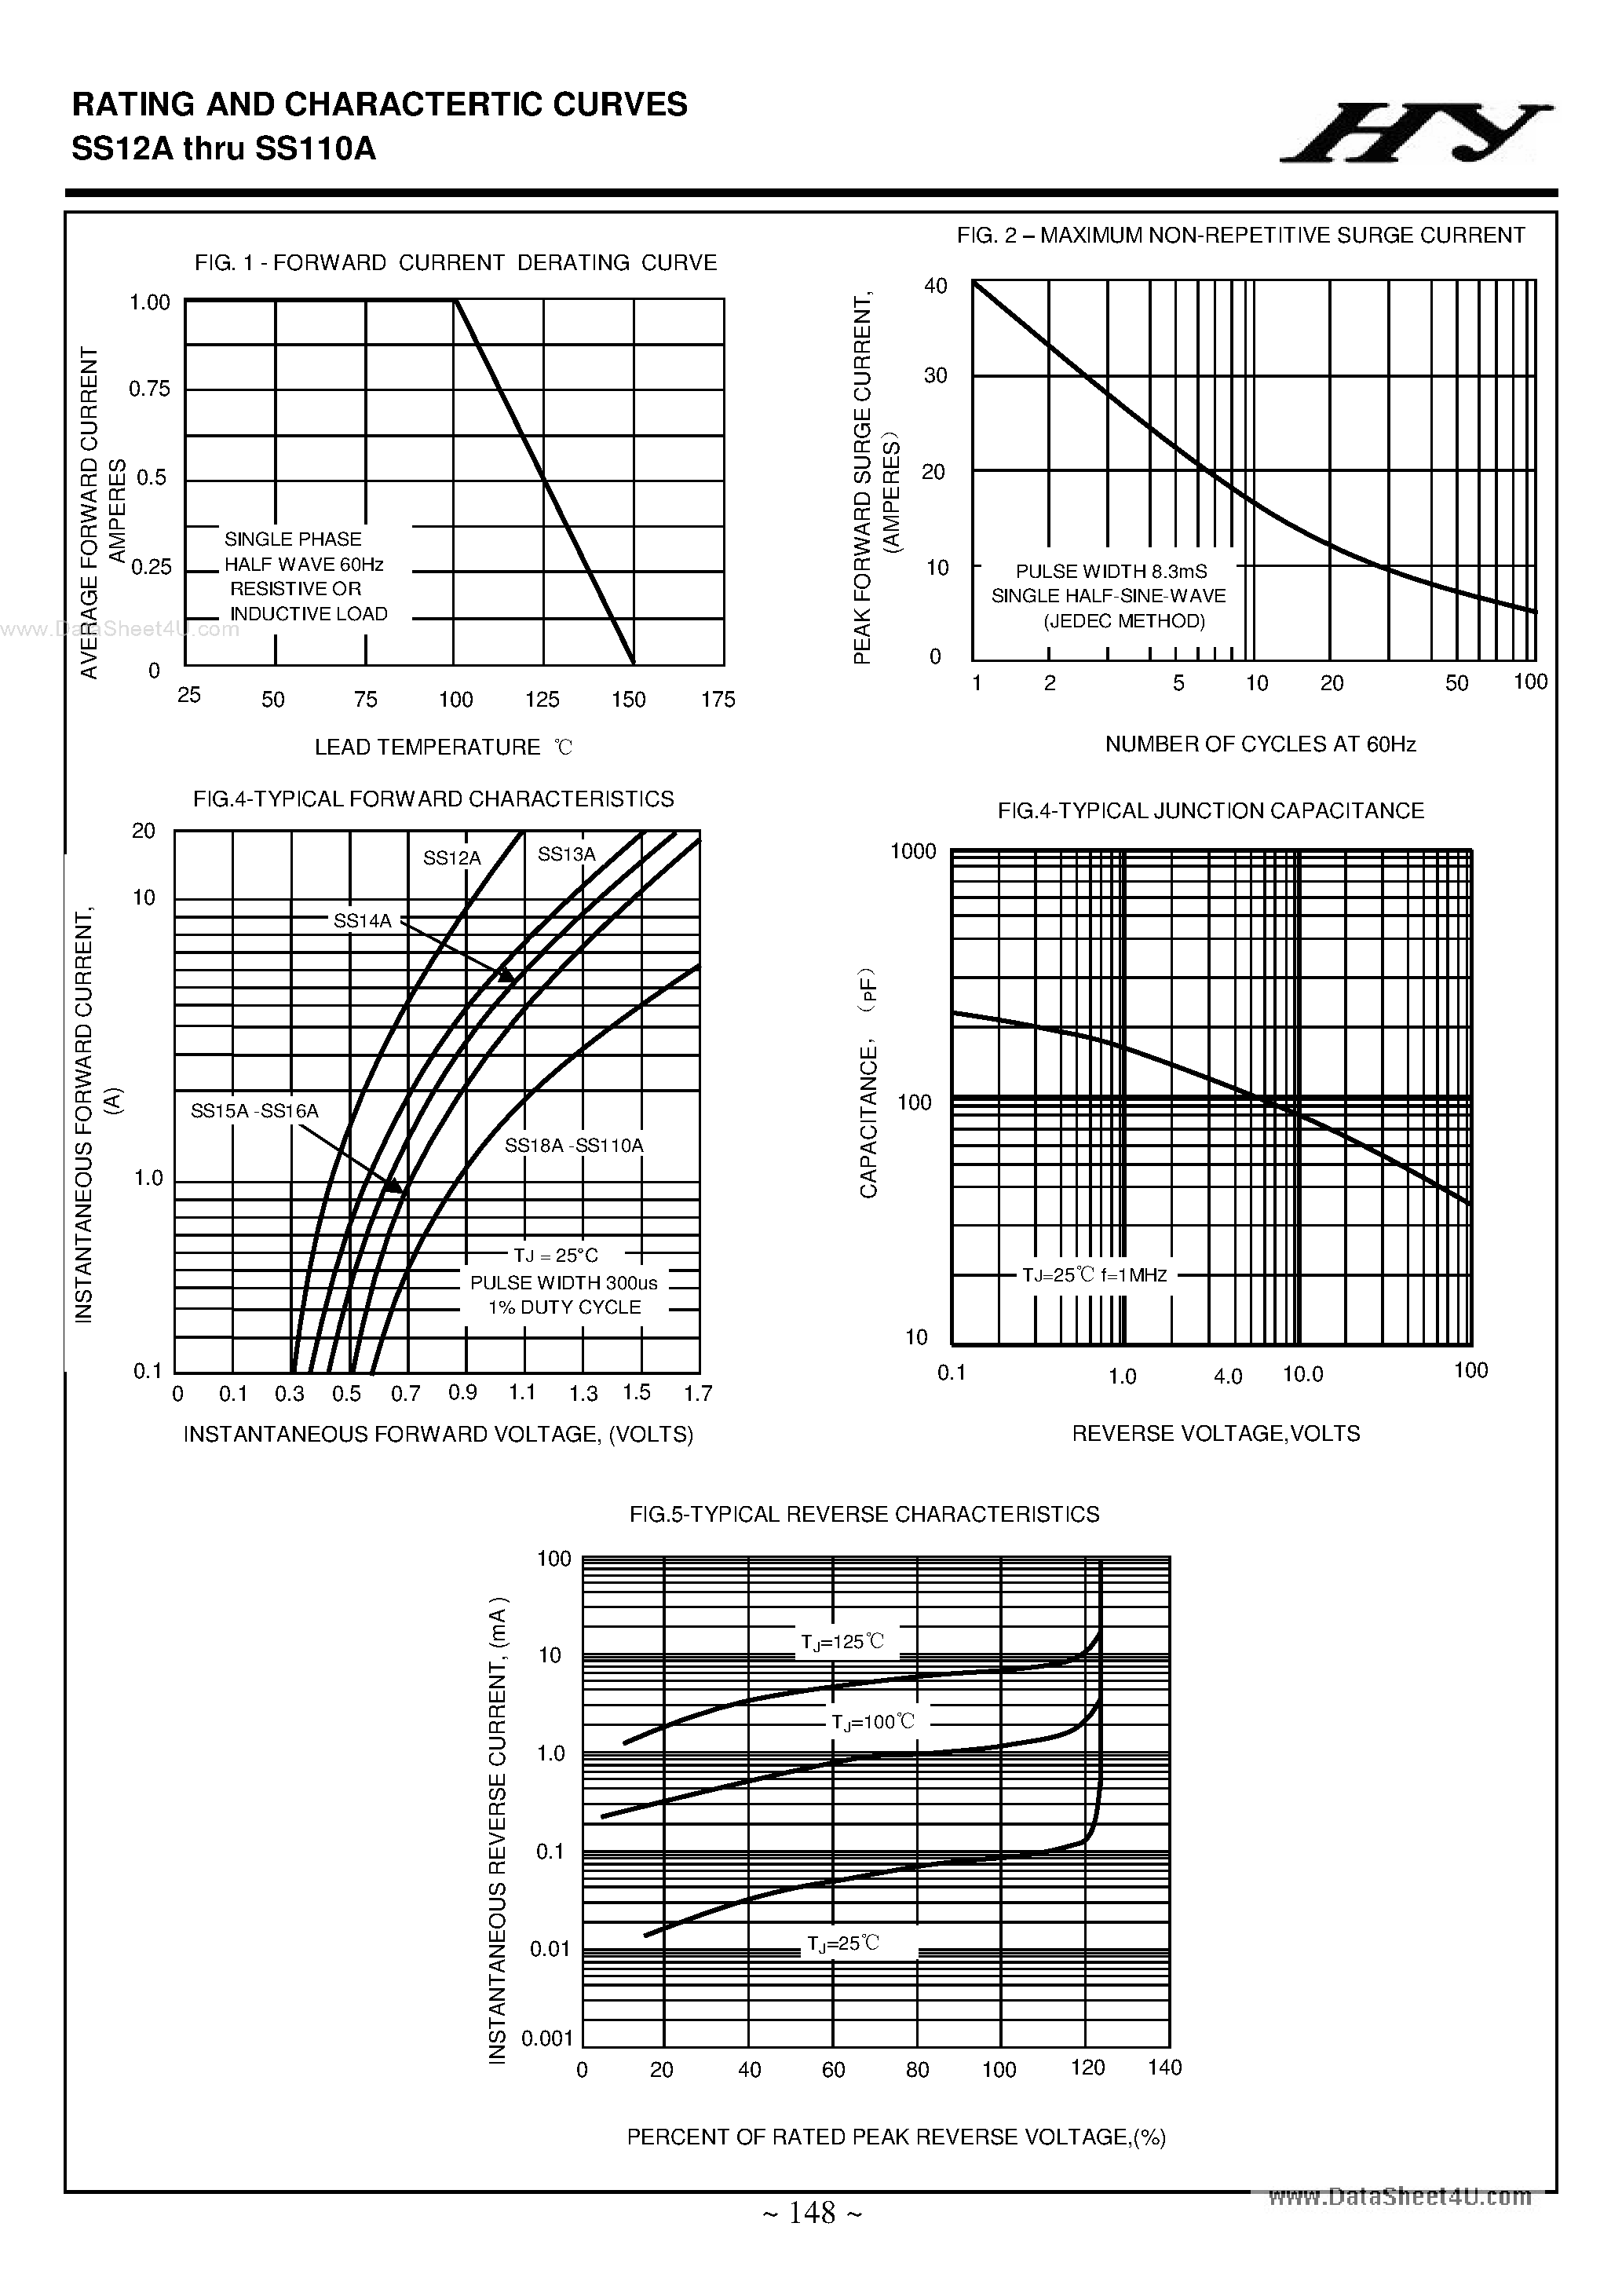 Datasheet SS110A - (SS12A - SS110A) RATING AND CHARACTERTIC CURVES page 2